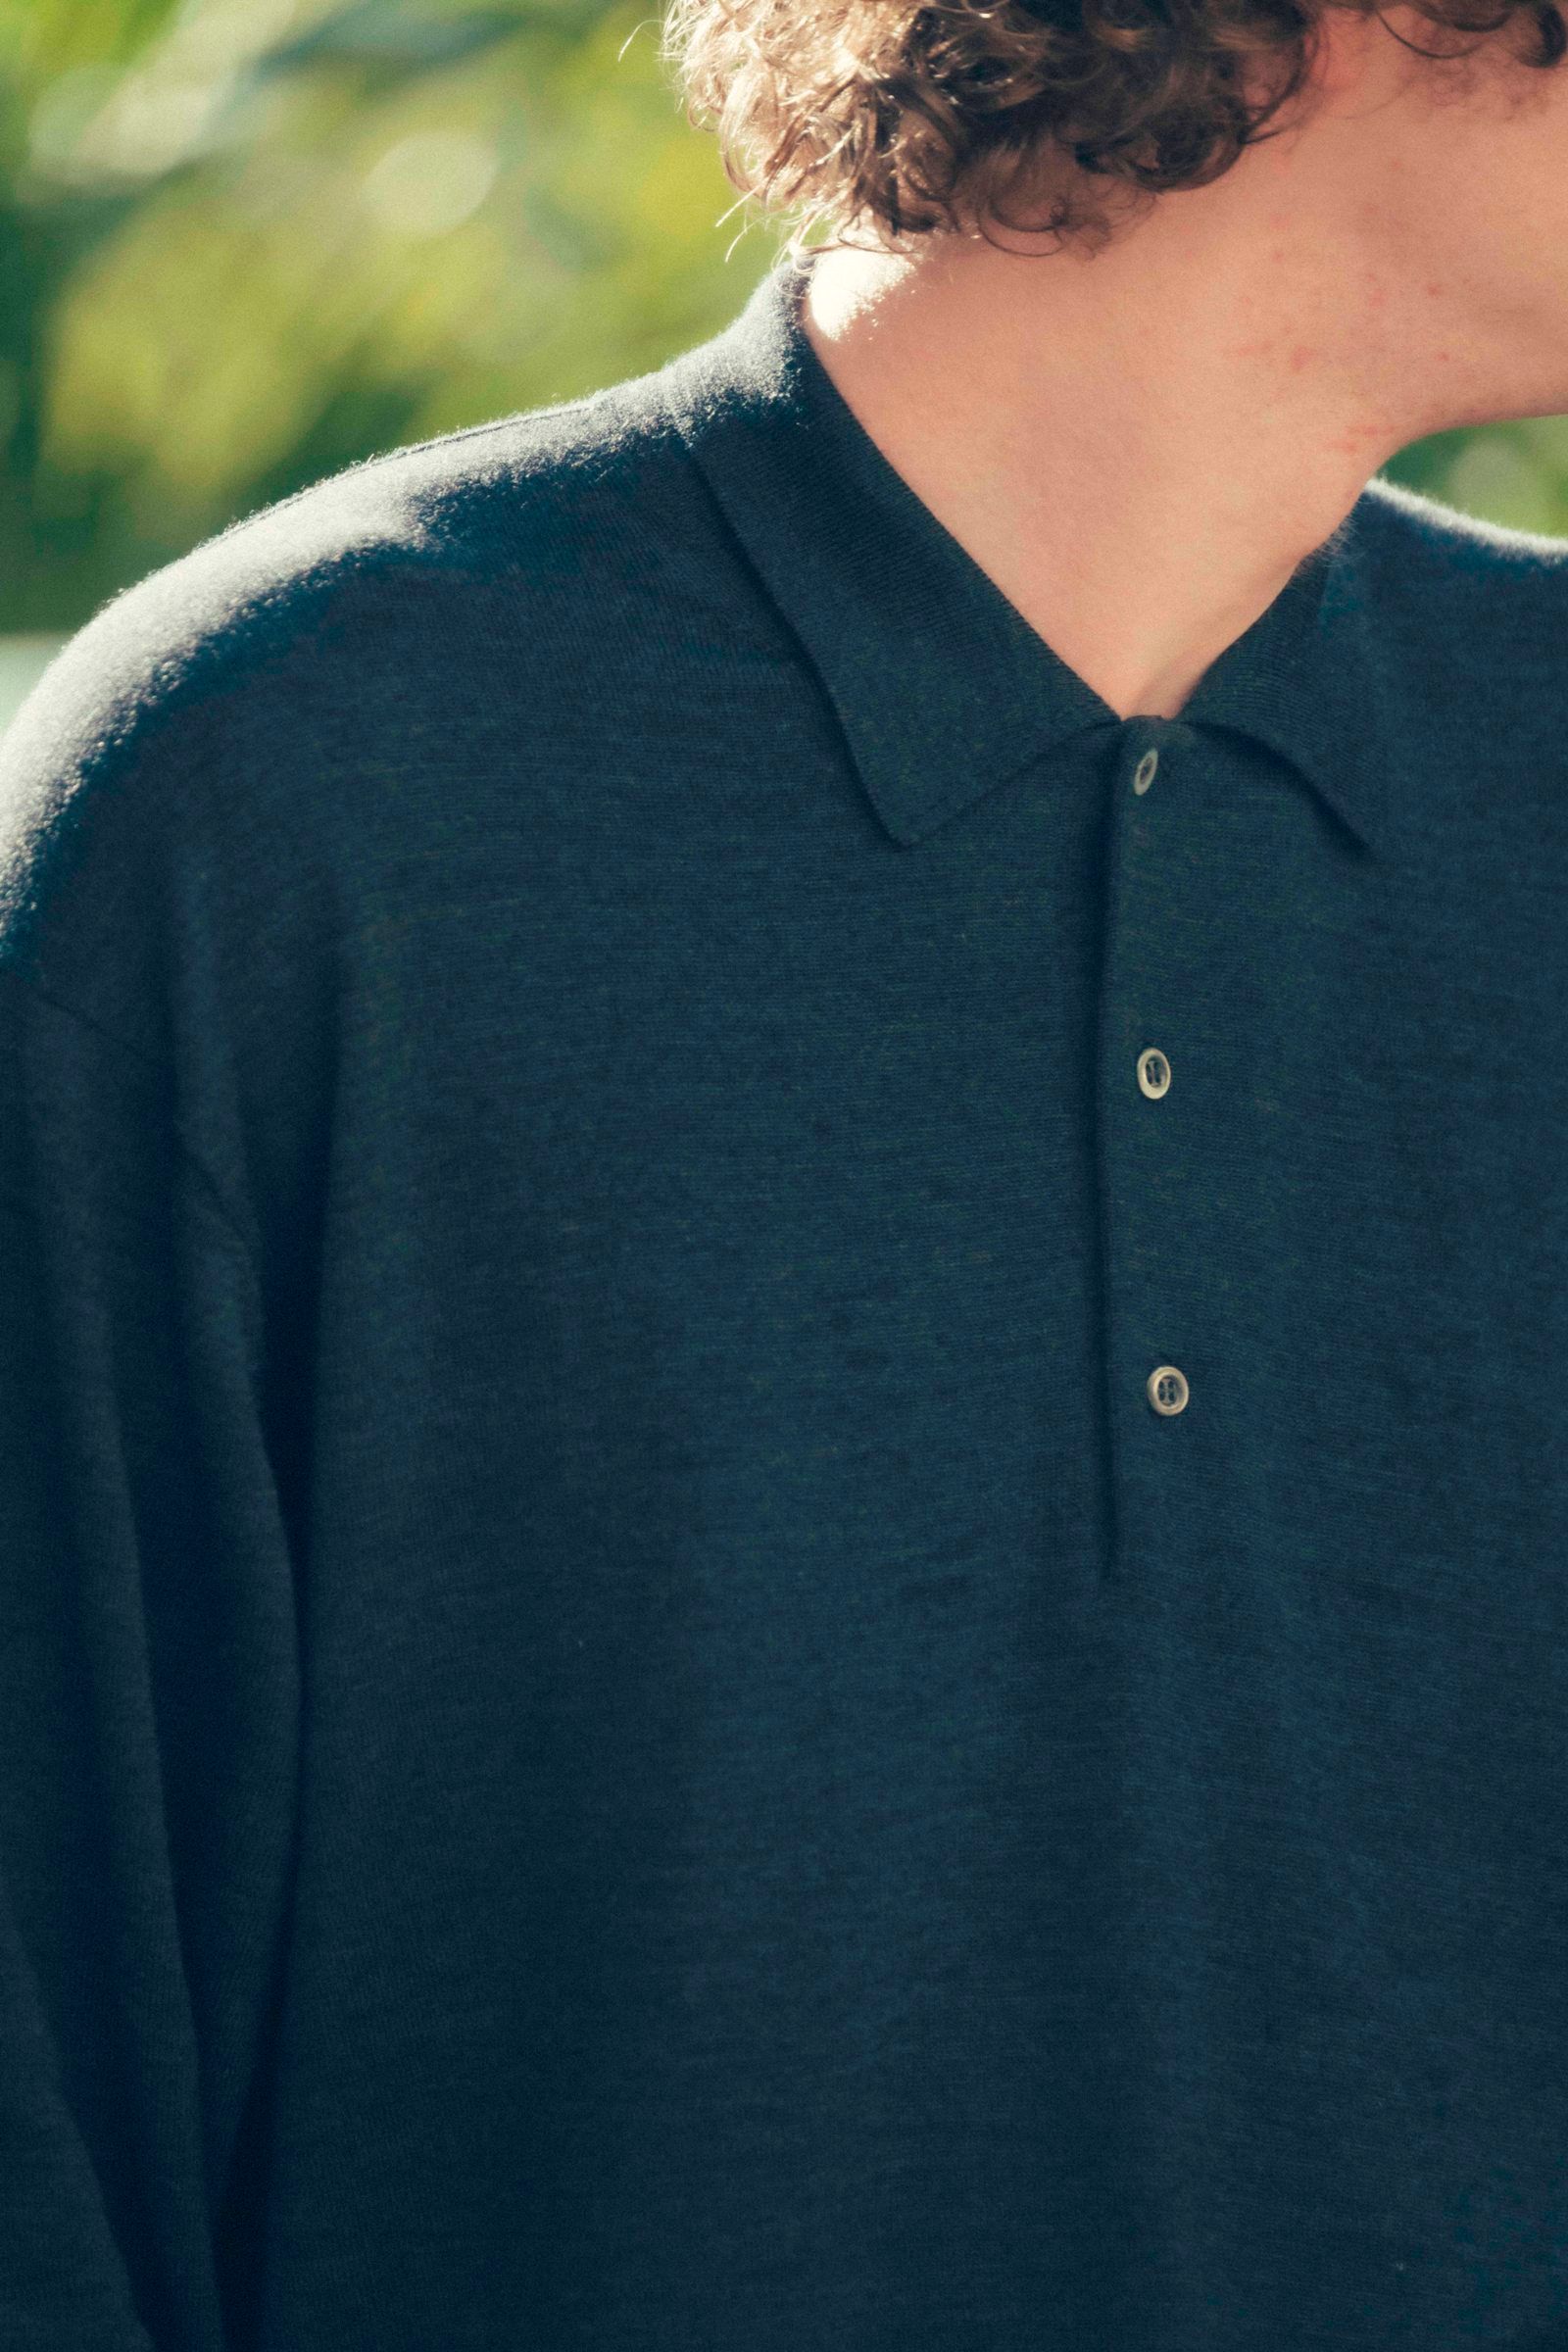 A.PRESSE - l/s knit polo shirts -charcoal- 22aw | asterisk